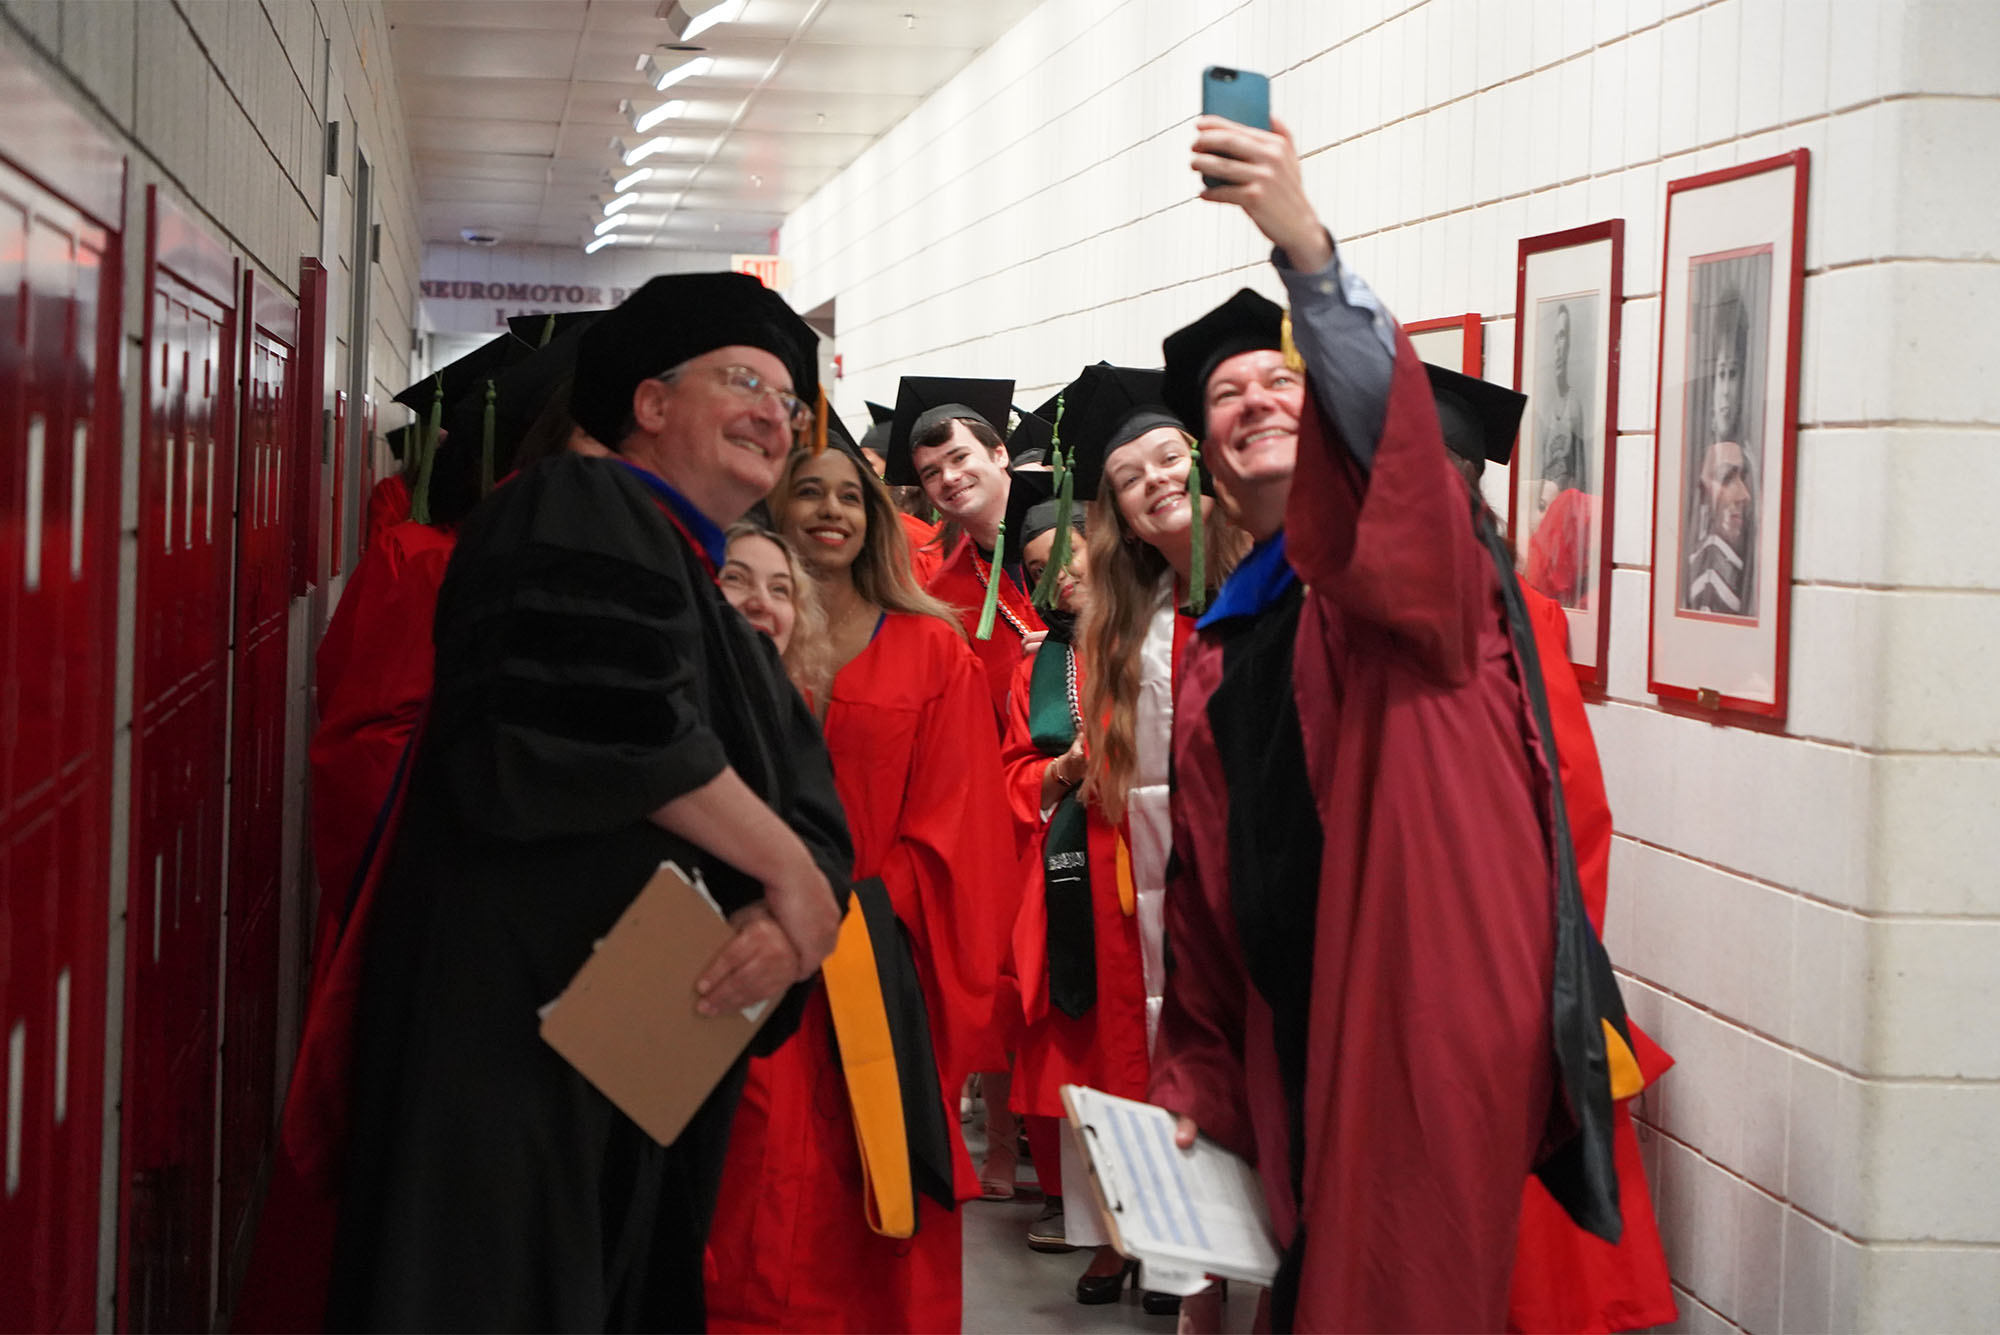 Photo: Louis Toth, a Chobanian & Avedisian School of Medicine associate clinical professor of anatomy and neurobiology, and Adam Hall, an assistant professor of anatomy and neurobiology, with Graduate Medical Sciences students at their May 16 convocation ceremony. A group of graduating students in robes snap a selfie with each other prior to the ceremony.